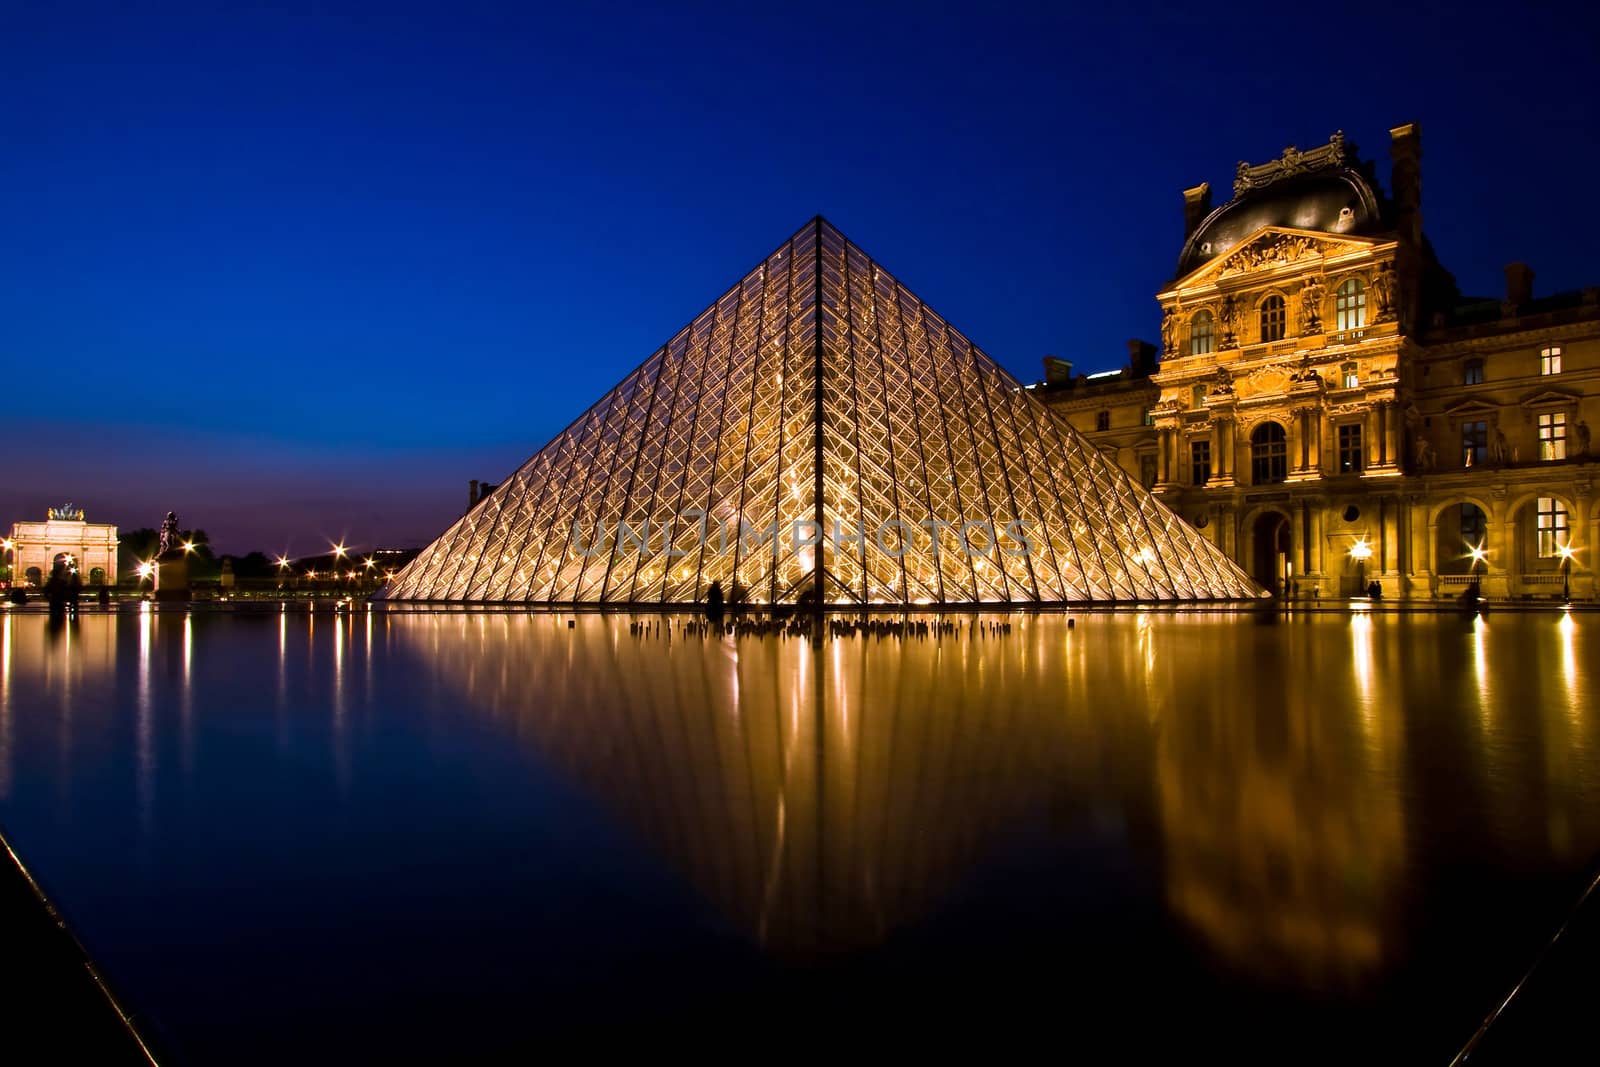 PARIS - APRIL 16: Reflection of Louvre pyramid shines at dusk during the Summer Exhibition April 16, 2010 in Paris. This is one of the most popular tourist destinations in France.